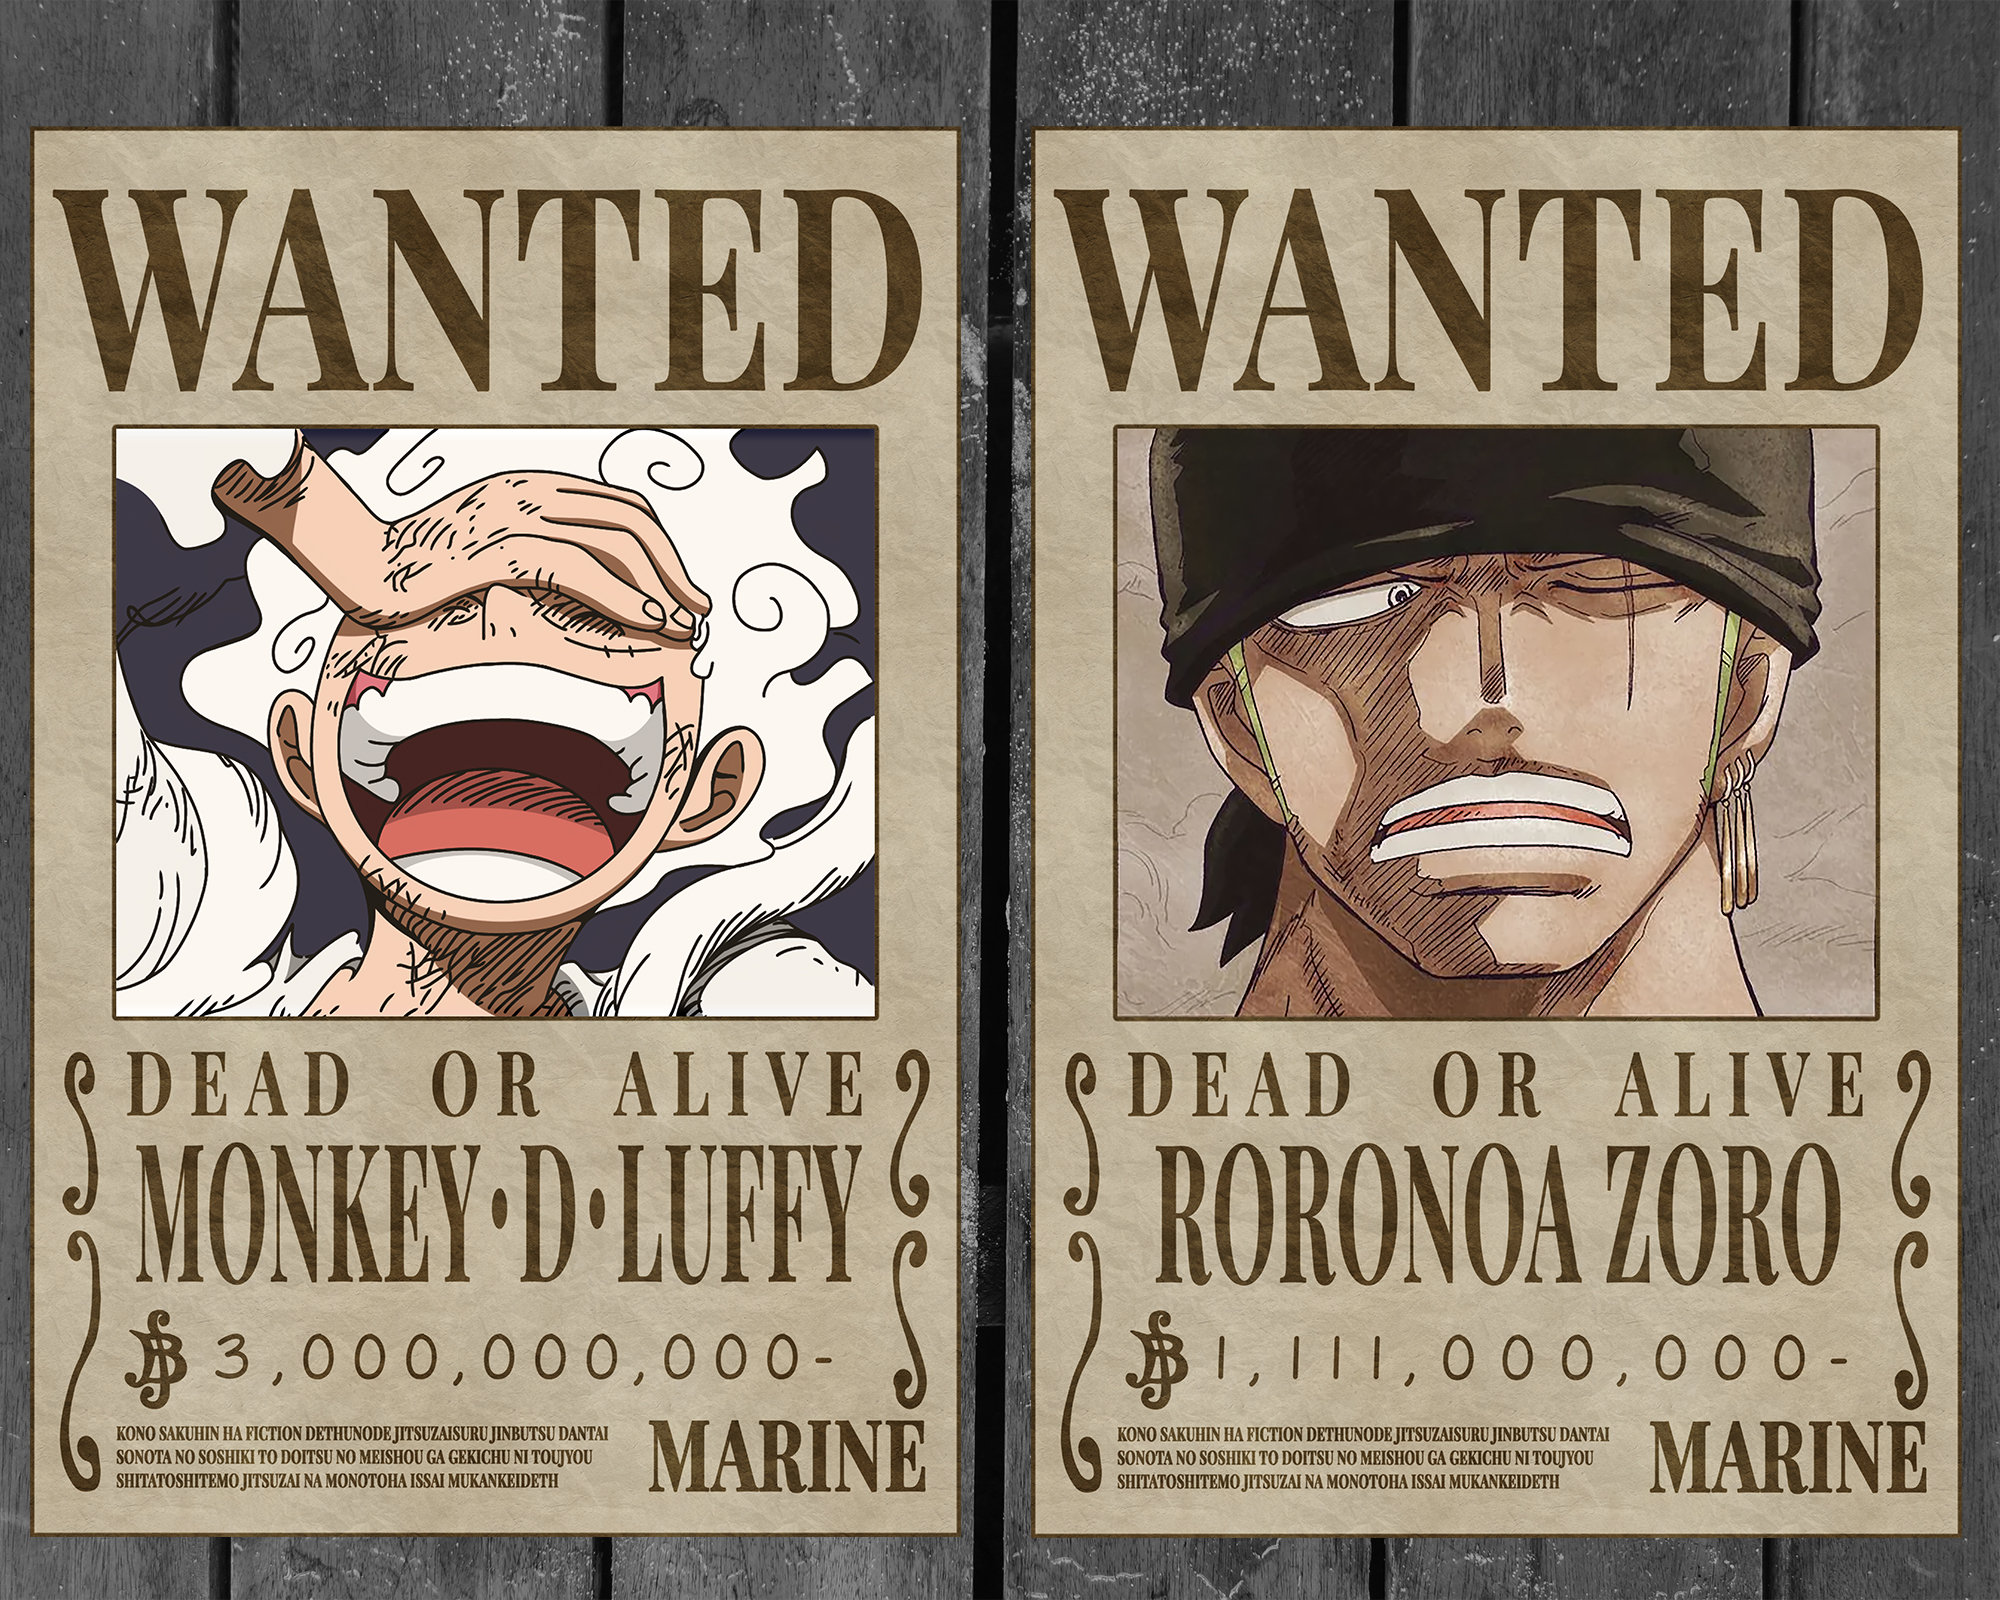 One Piece Wanted Posters Explained